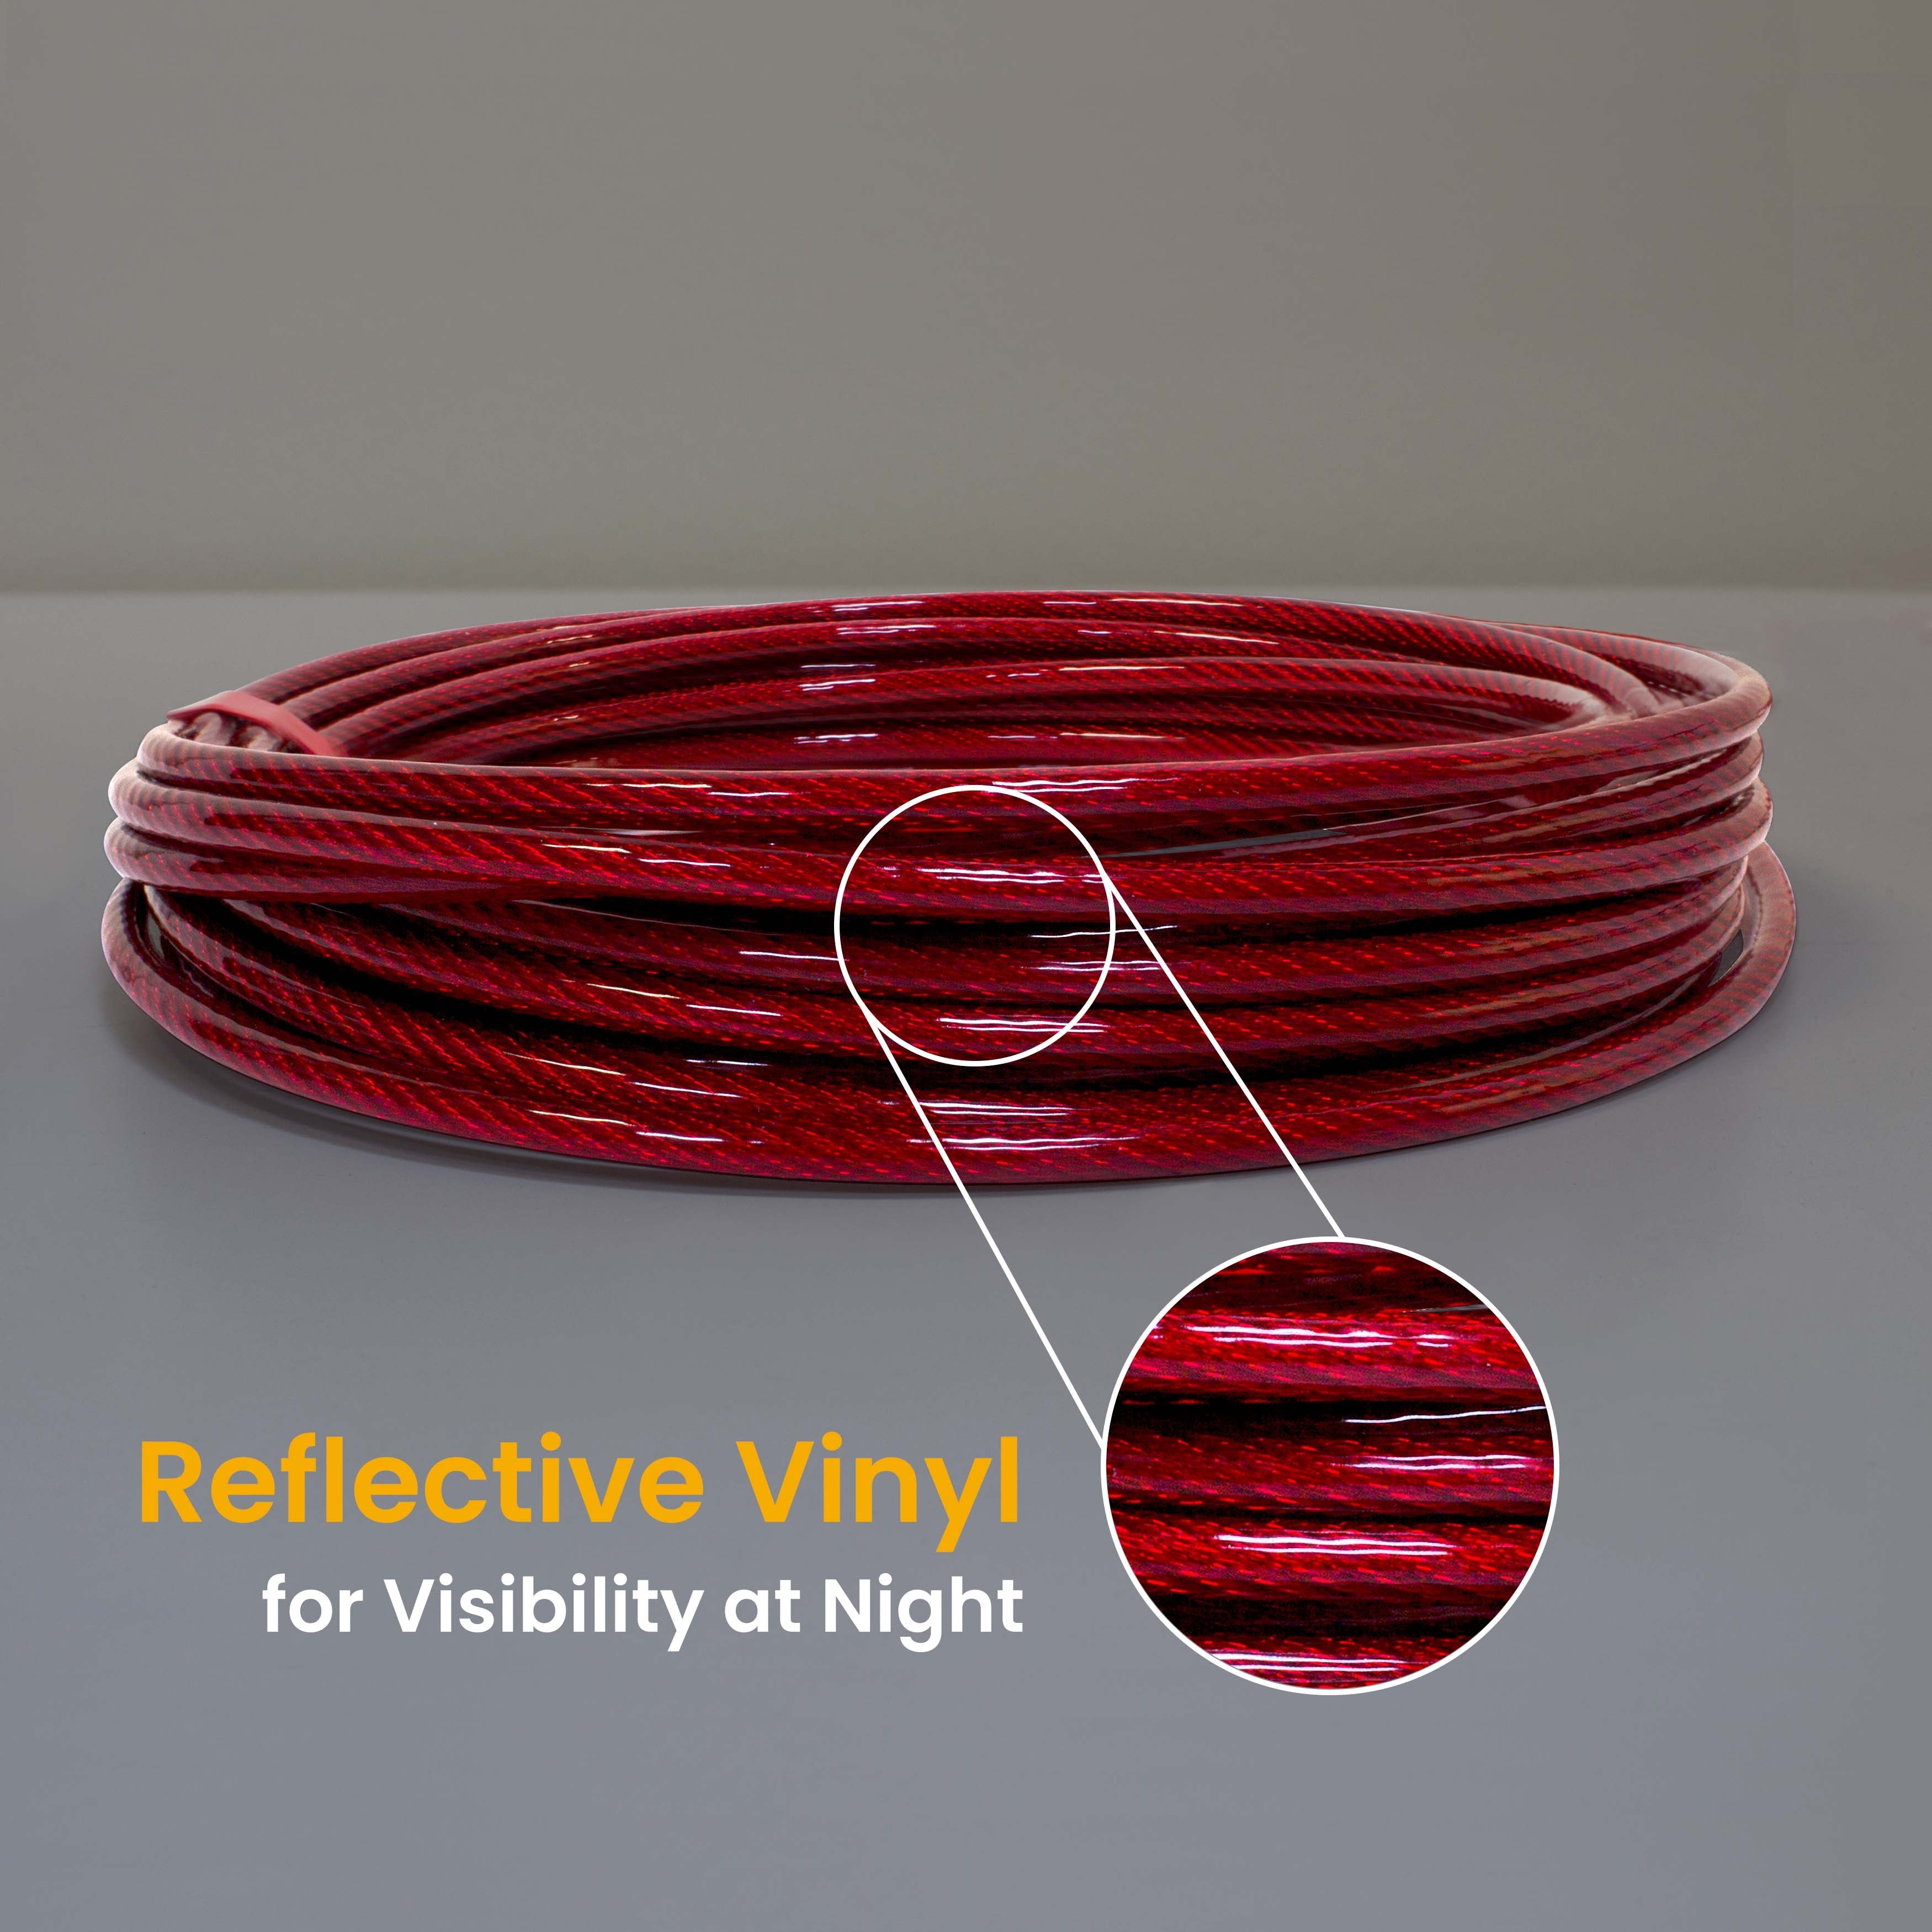 Trolley System Runner Cable Features Reflective Vinyl